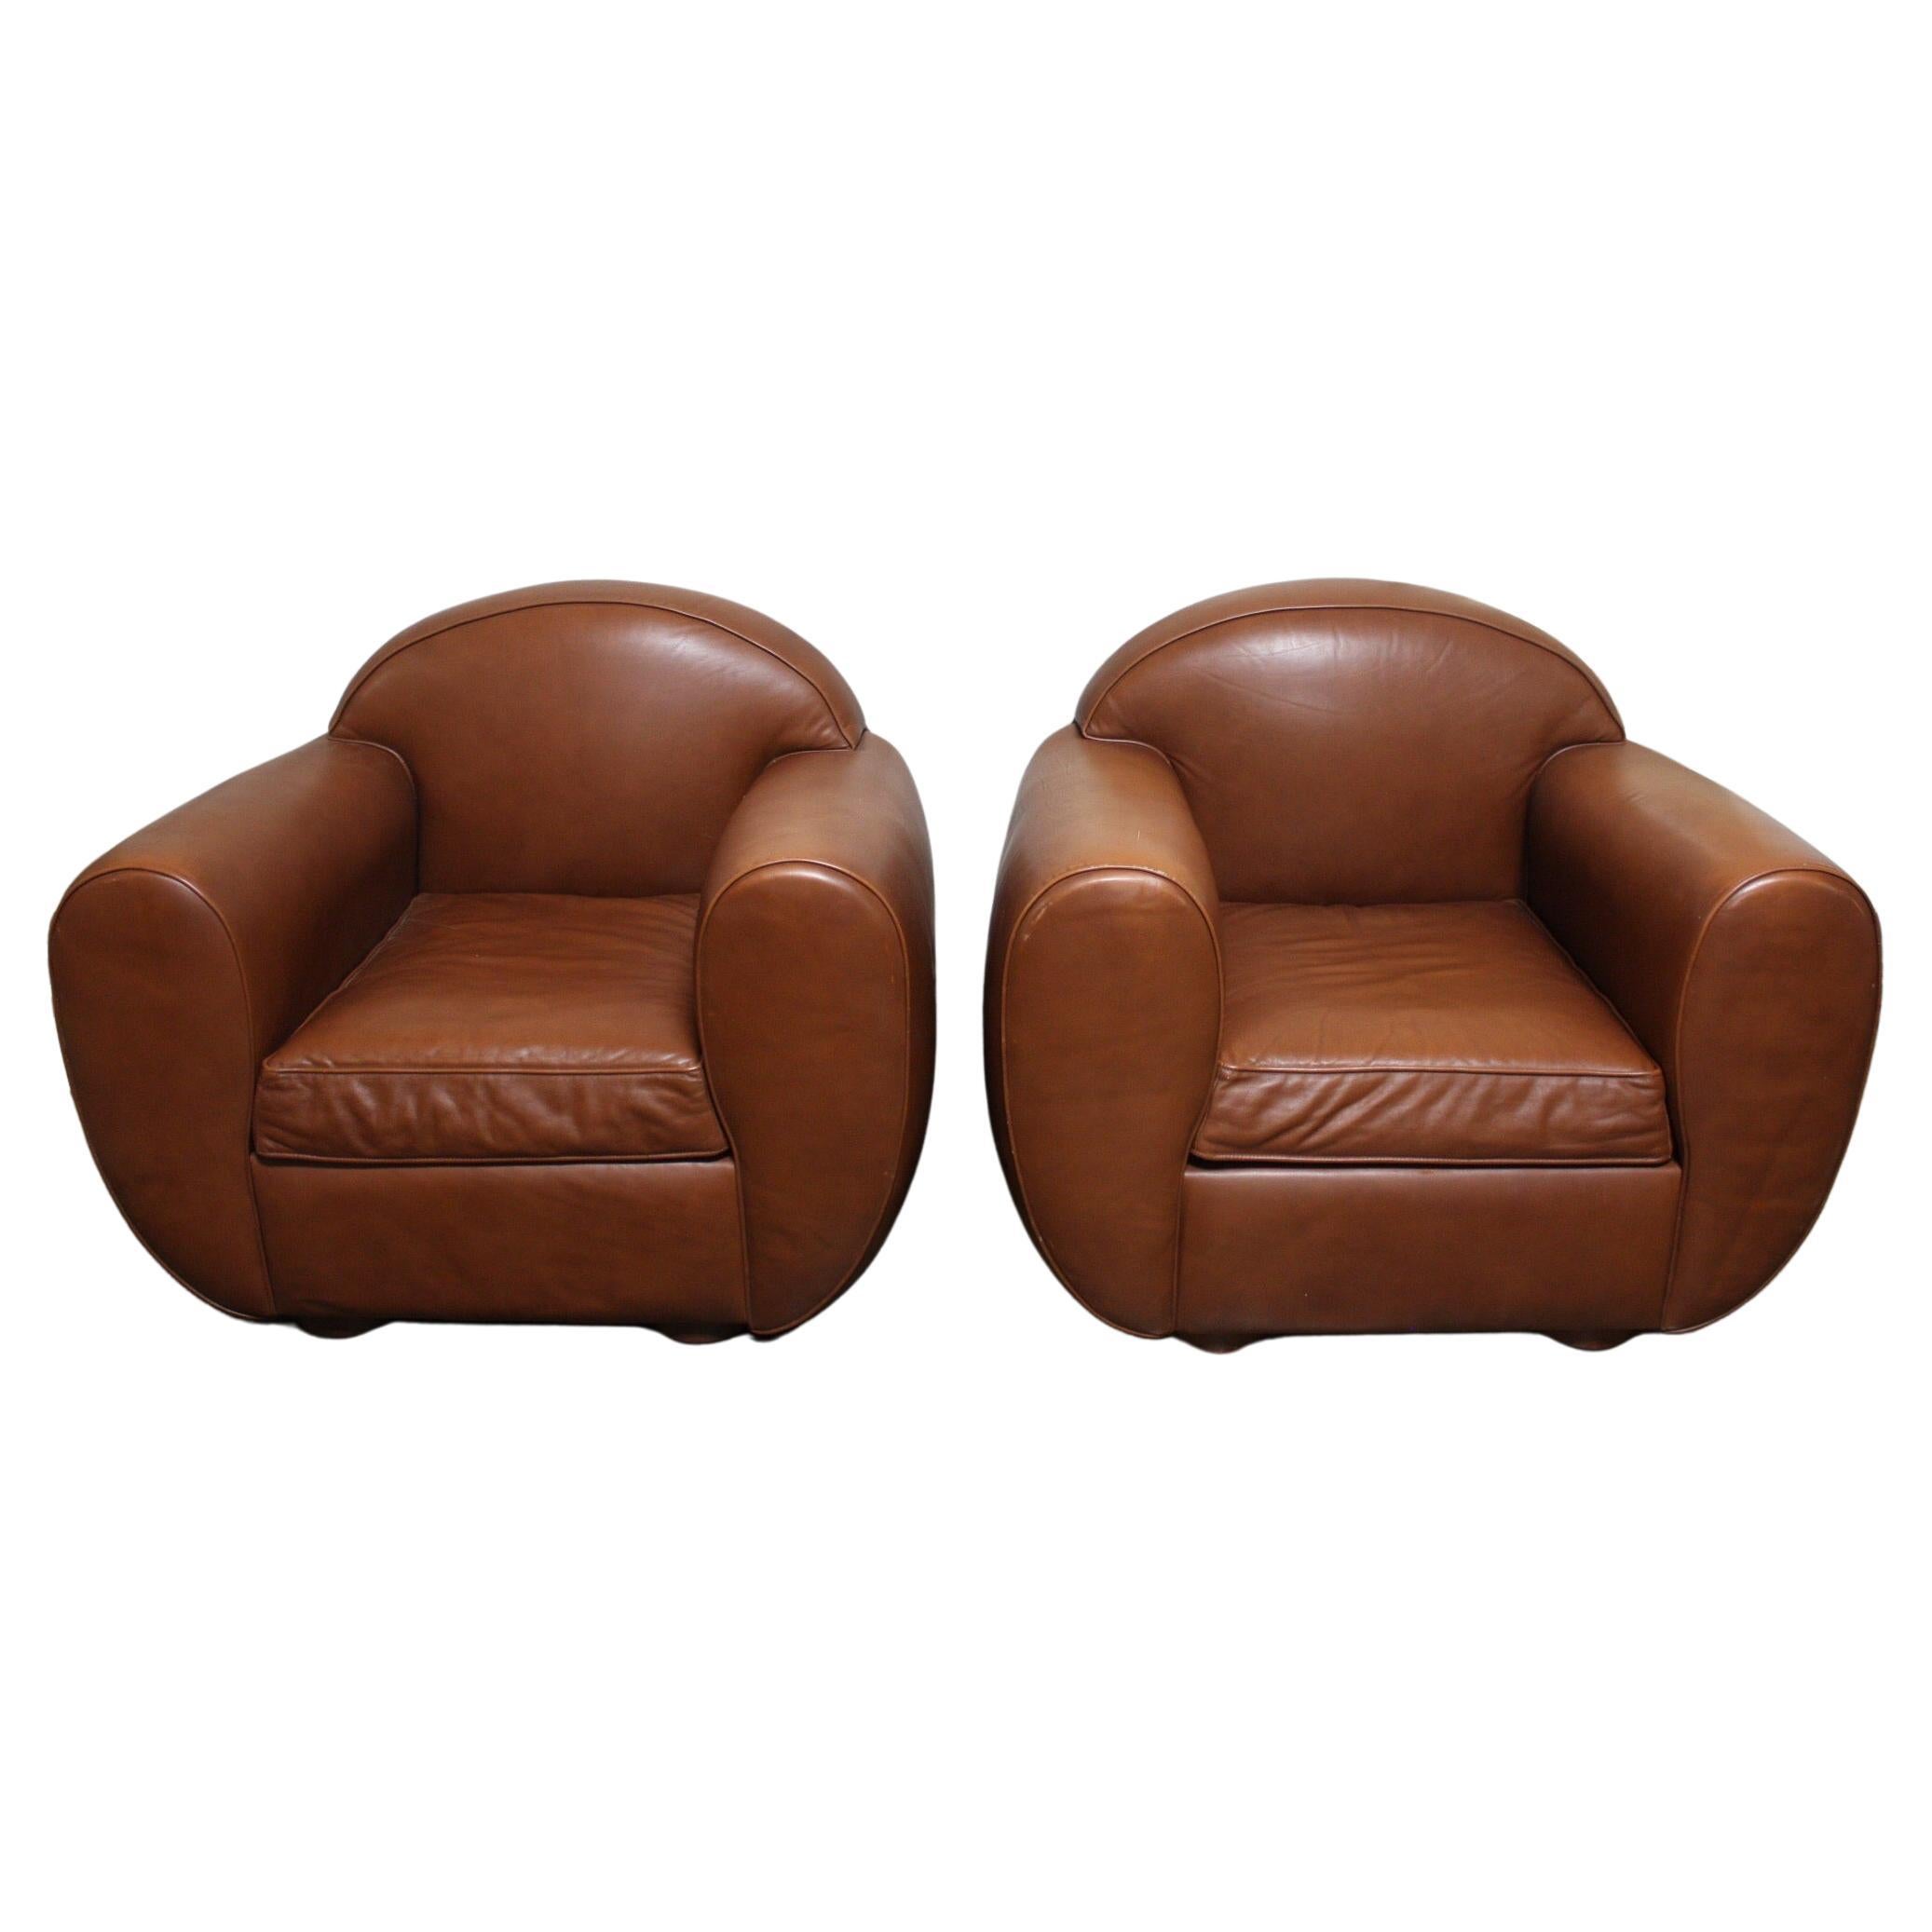 Late 20th Century Pair of French Leather Club Chairs For Sale